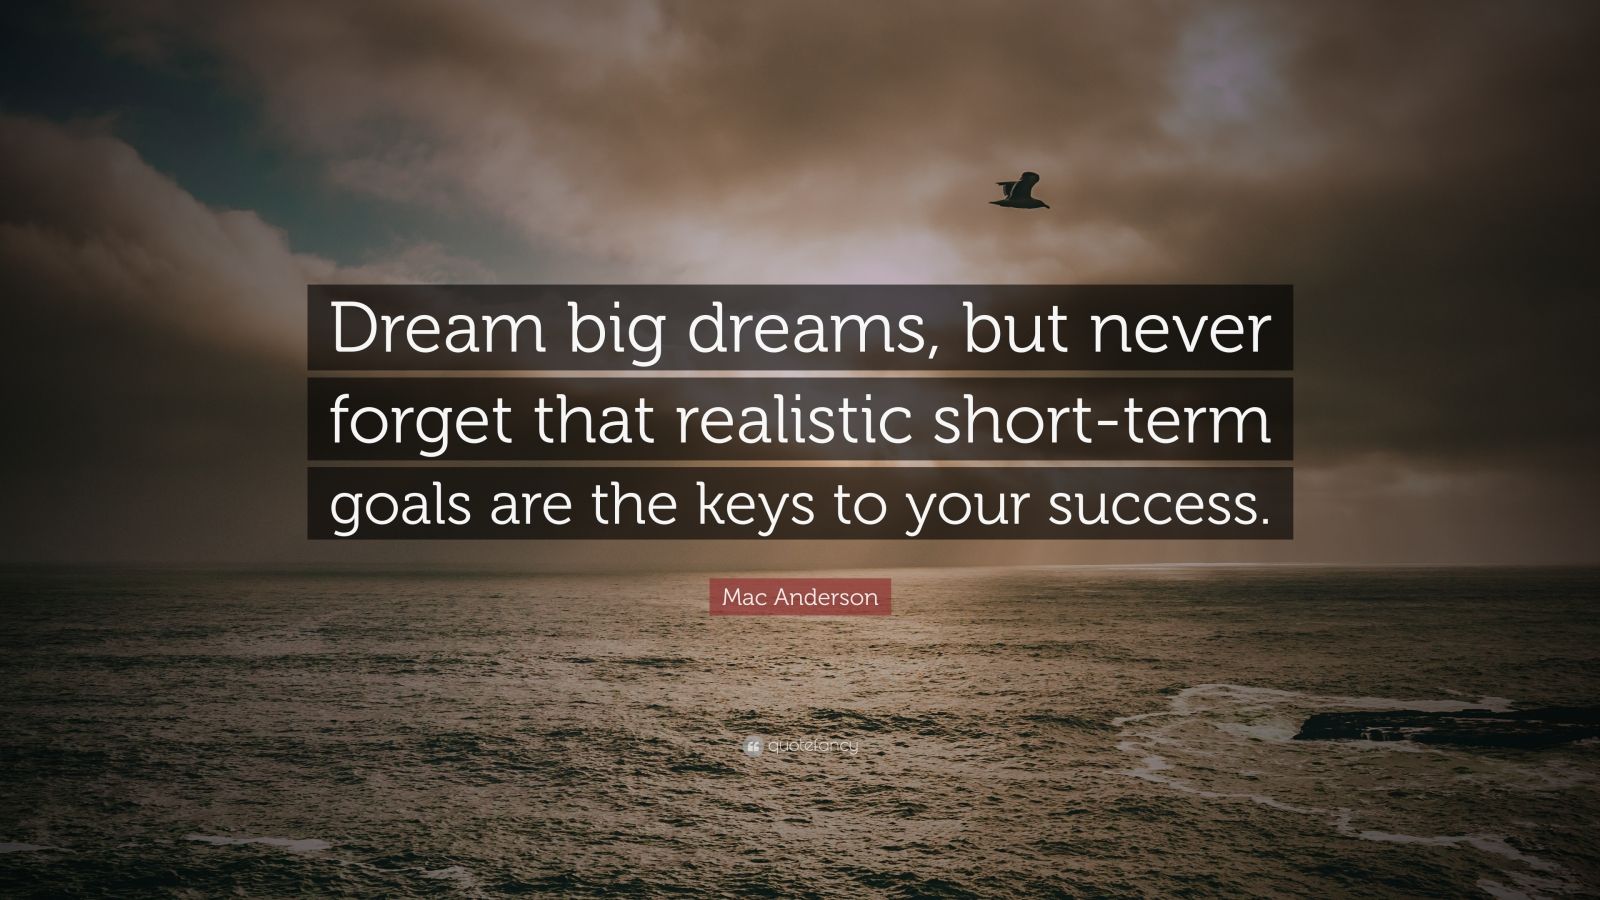 Mac Anderson Quote: “Dream big dreams, but never forget that realistic